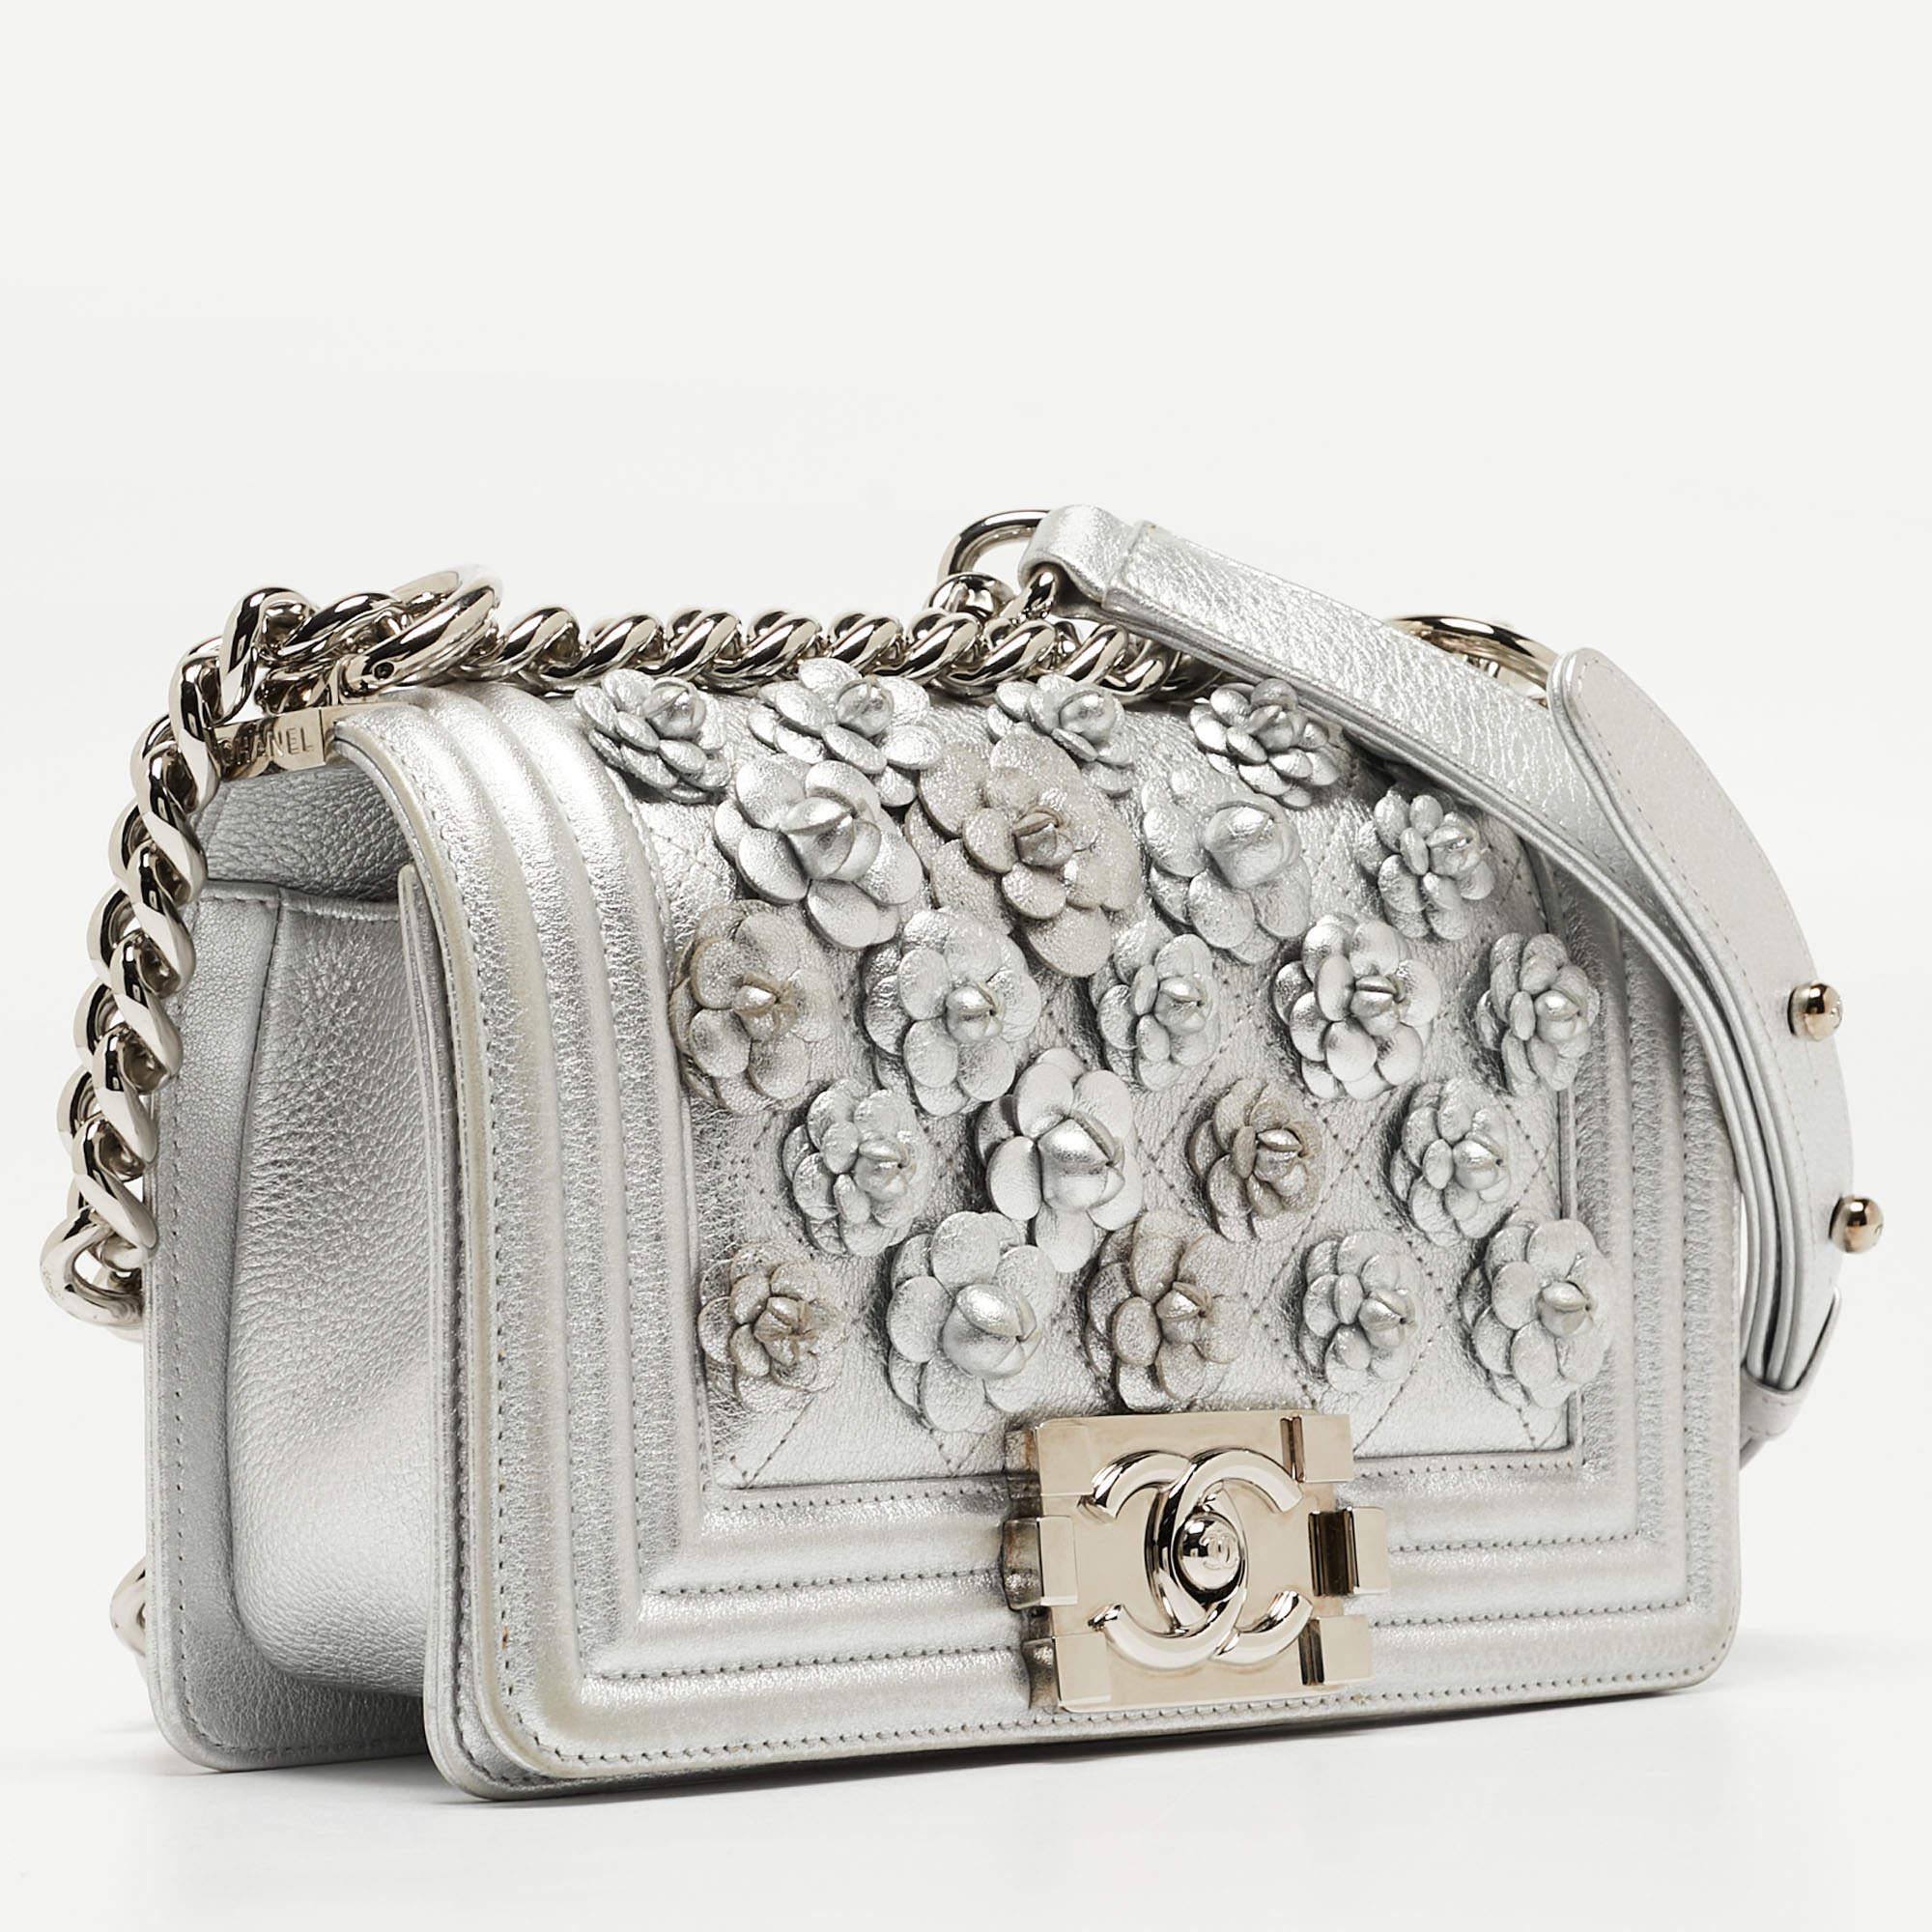 Chanel Silver Quilted Leather Small Camellia Applique Boy Flap Bag In Good Condition For Sale In Dubai, Al Qouz 2